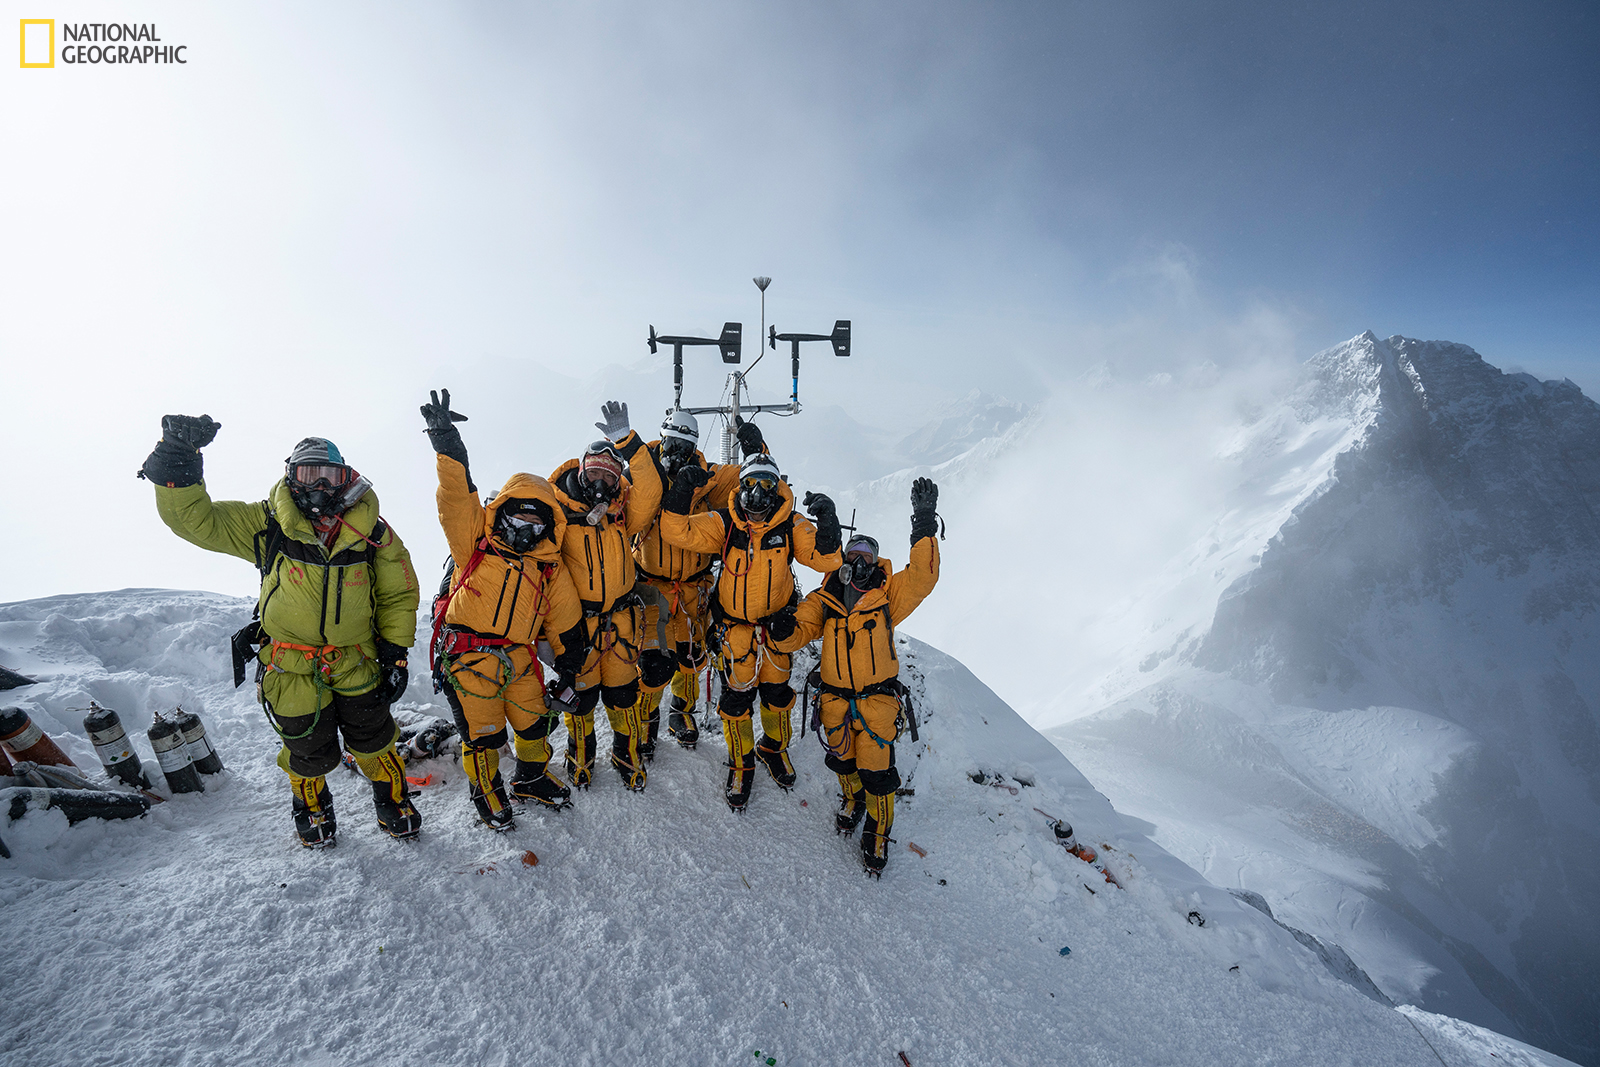 We battled hordes of tourists to put a weather station in Everest’s ‘death zone’